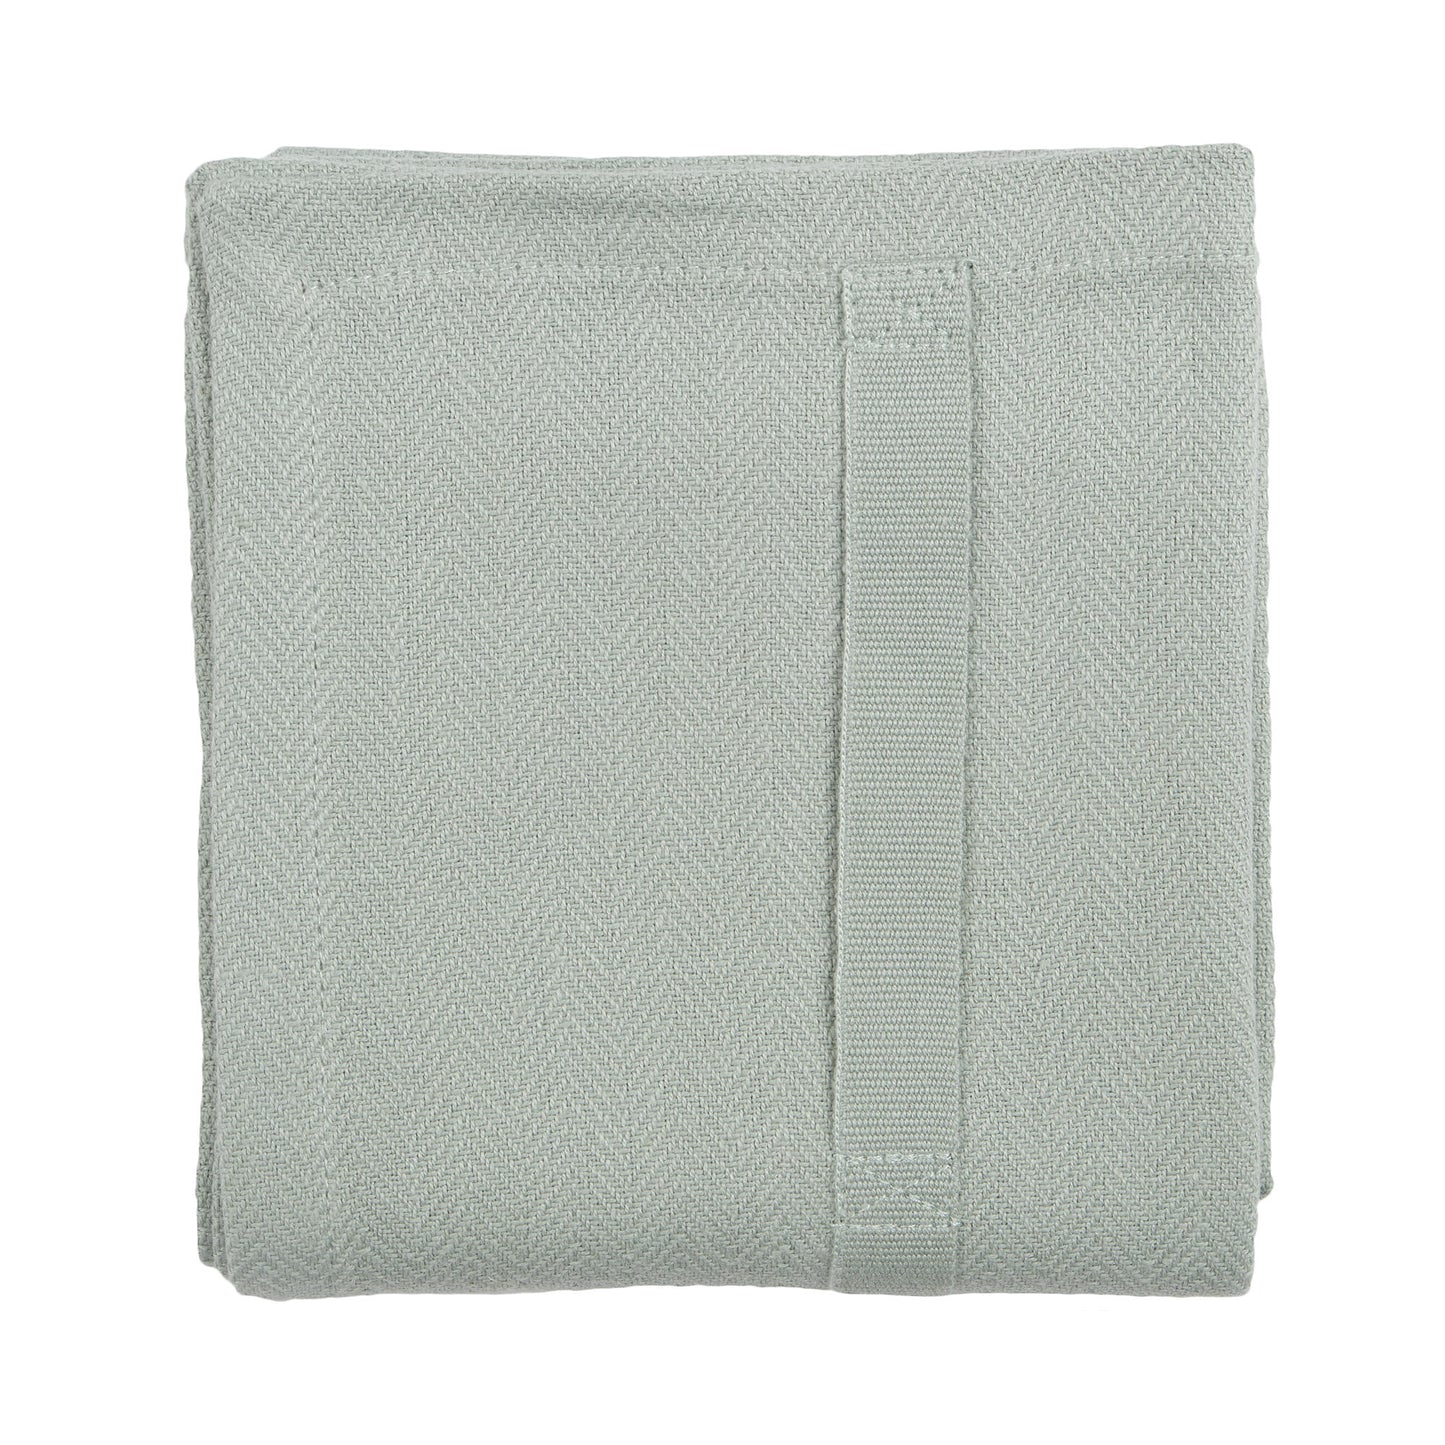 The Organic Company Kitchen Towel in Dusty Mint